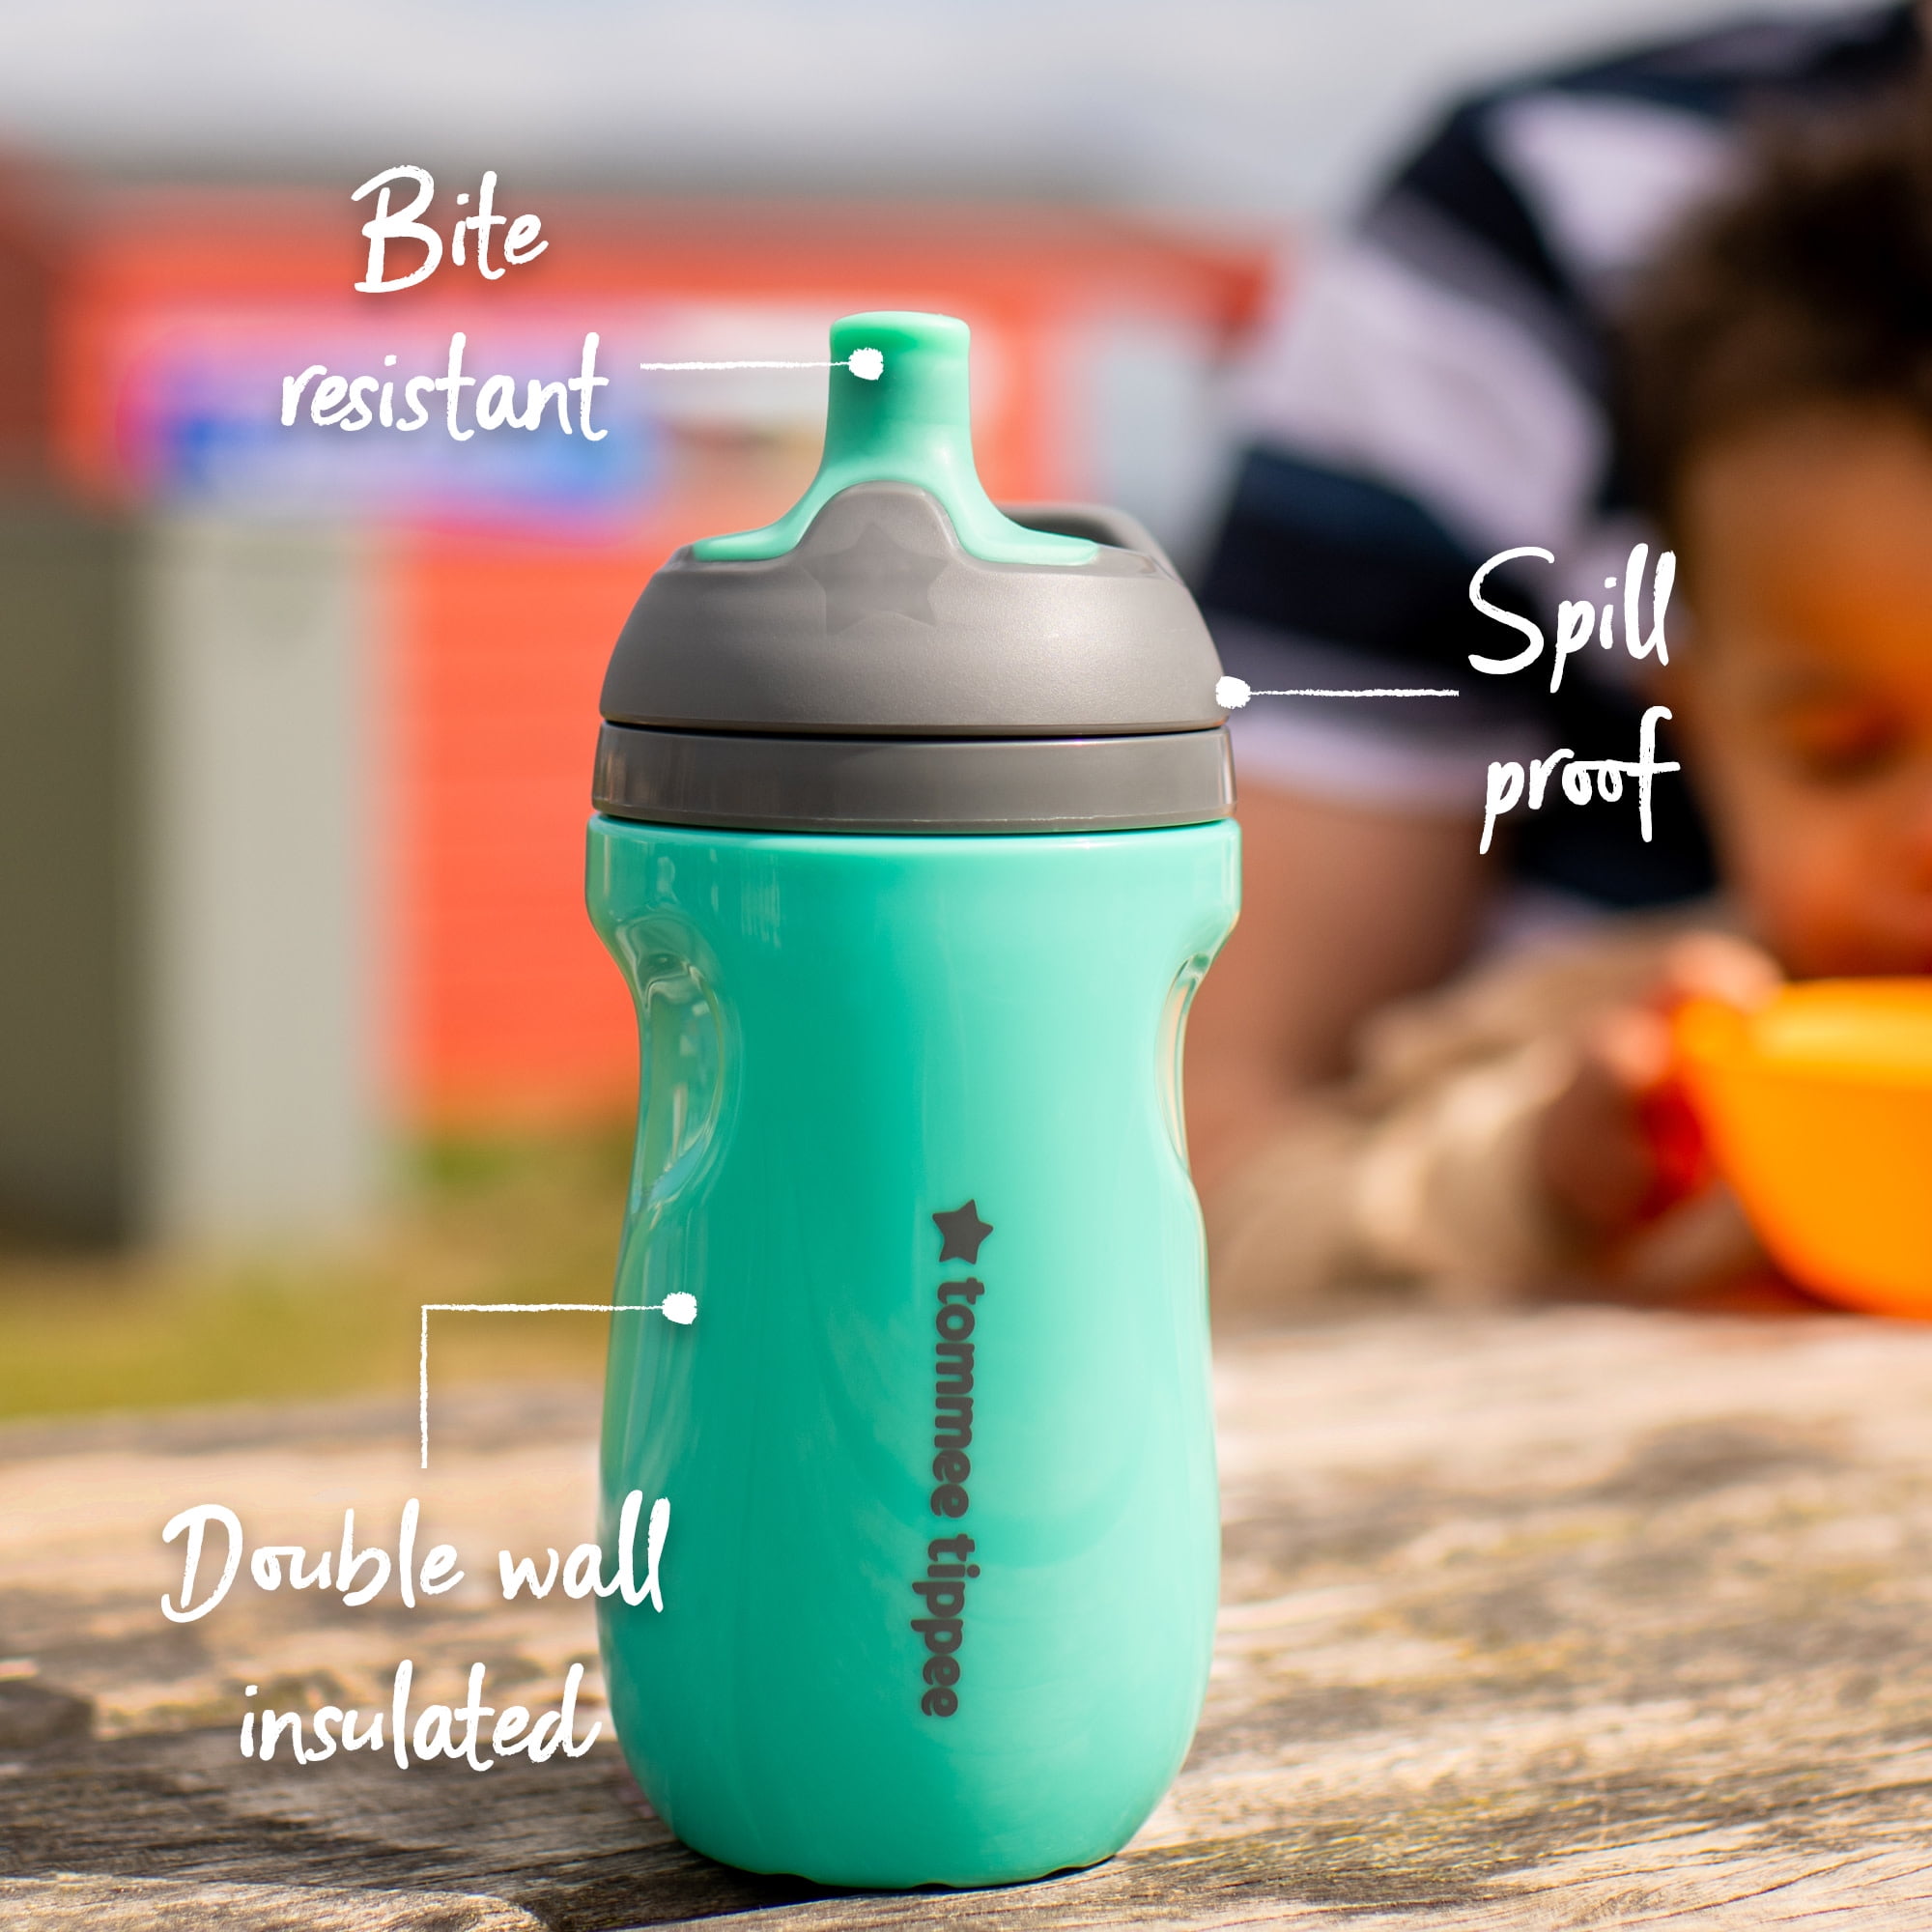 Tommee Tippee Insulated Sportee Toddler Water Bottle with Handle, Girl —  12m+, 2ct